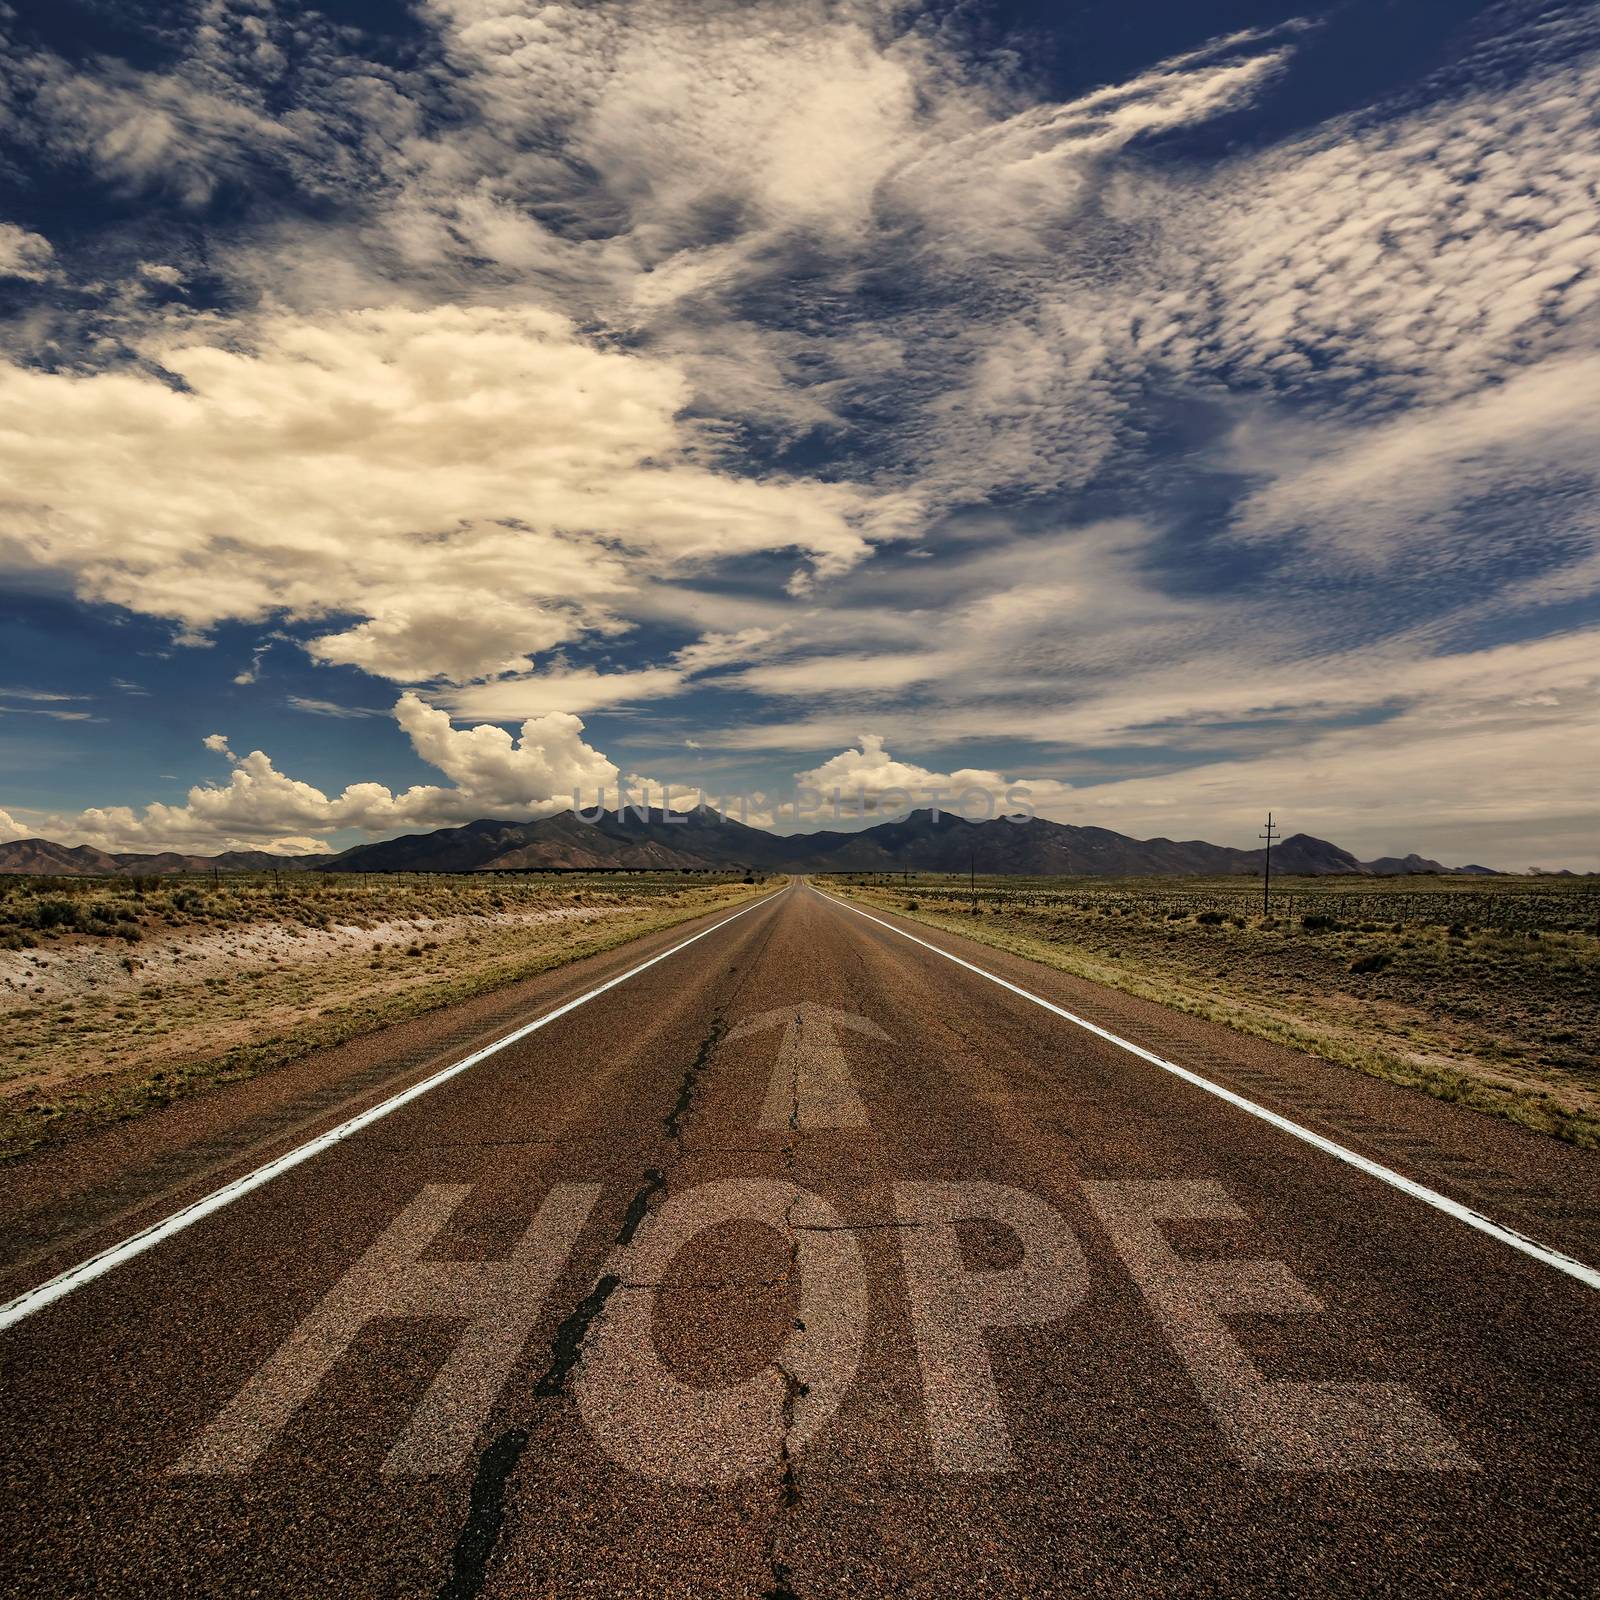 Conceptual image of desert road with the word hope and arrow